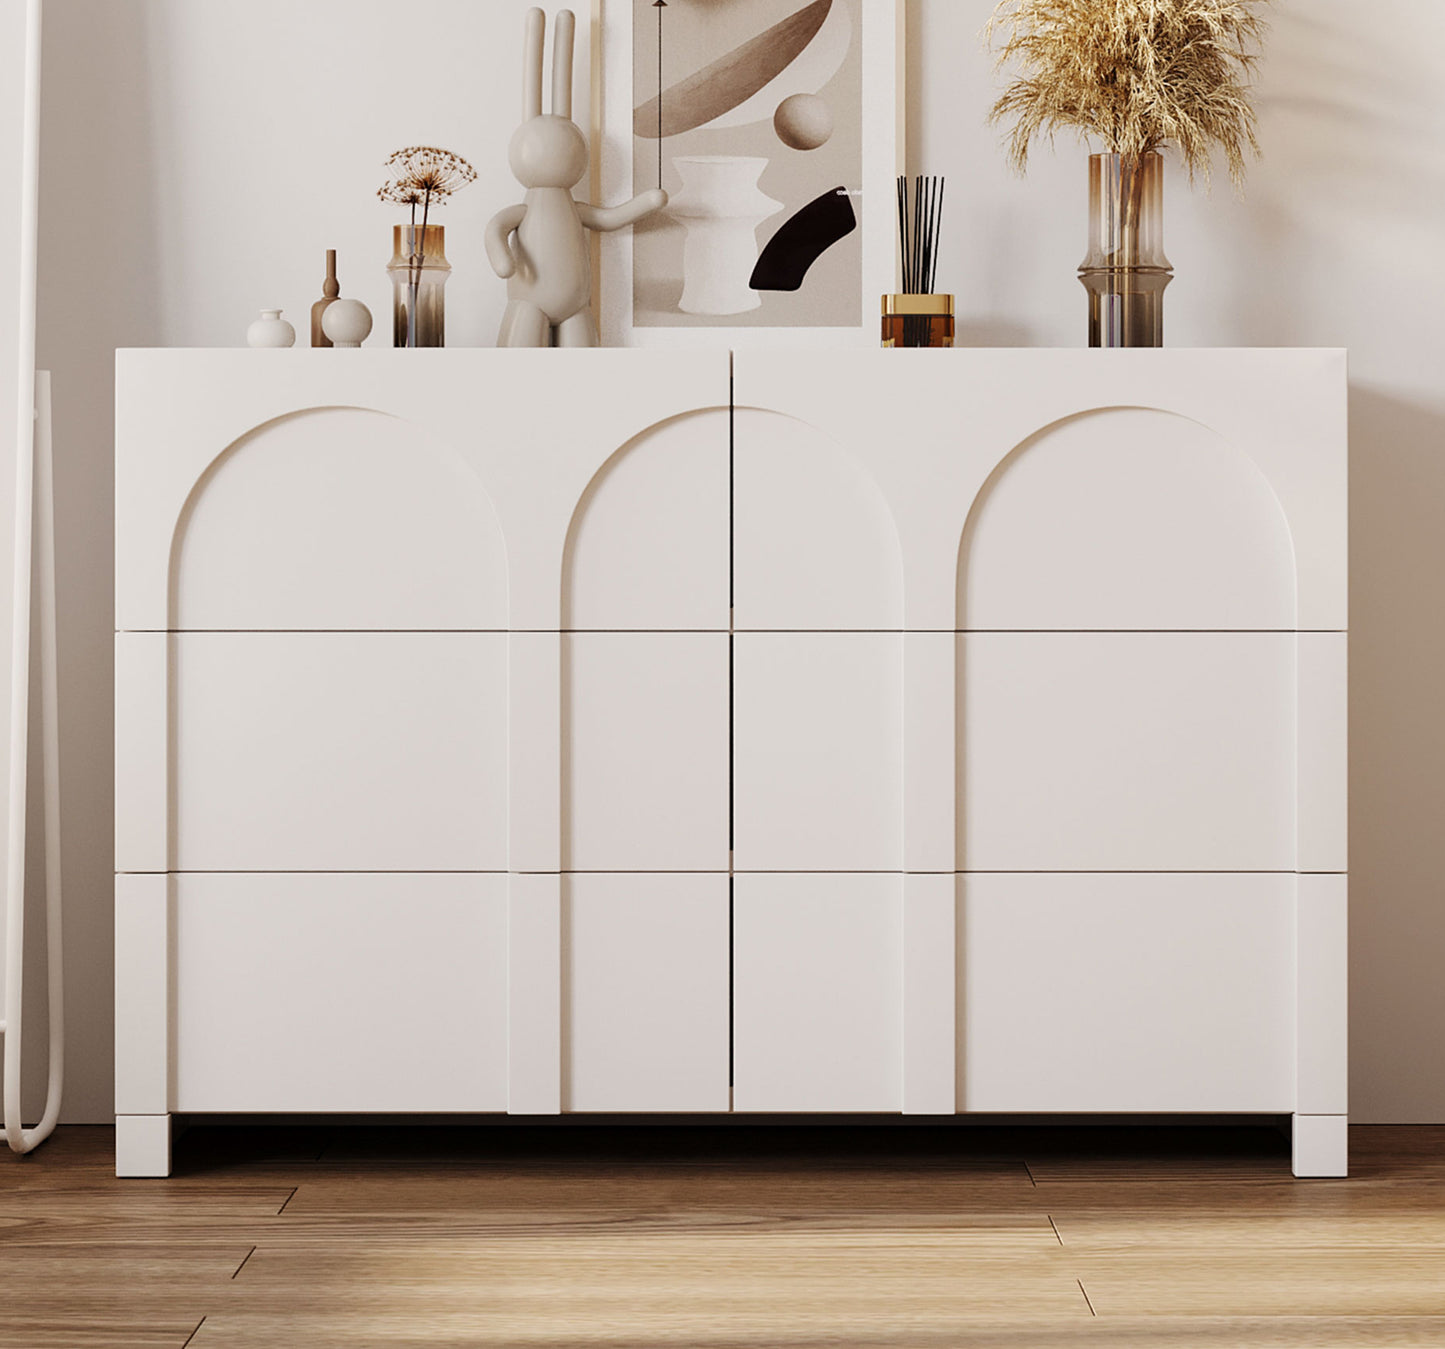 Modern Style Six-Drawer Dresser Sideboard Cabinet Ample Storage Spaces for Living Room, Children's Room, Adult Room, Half Gloss White